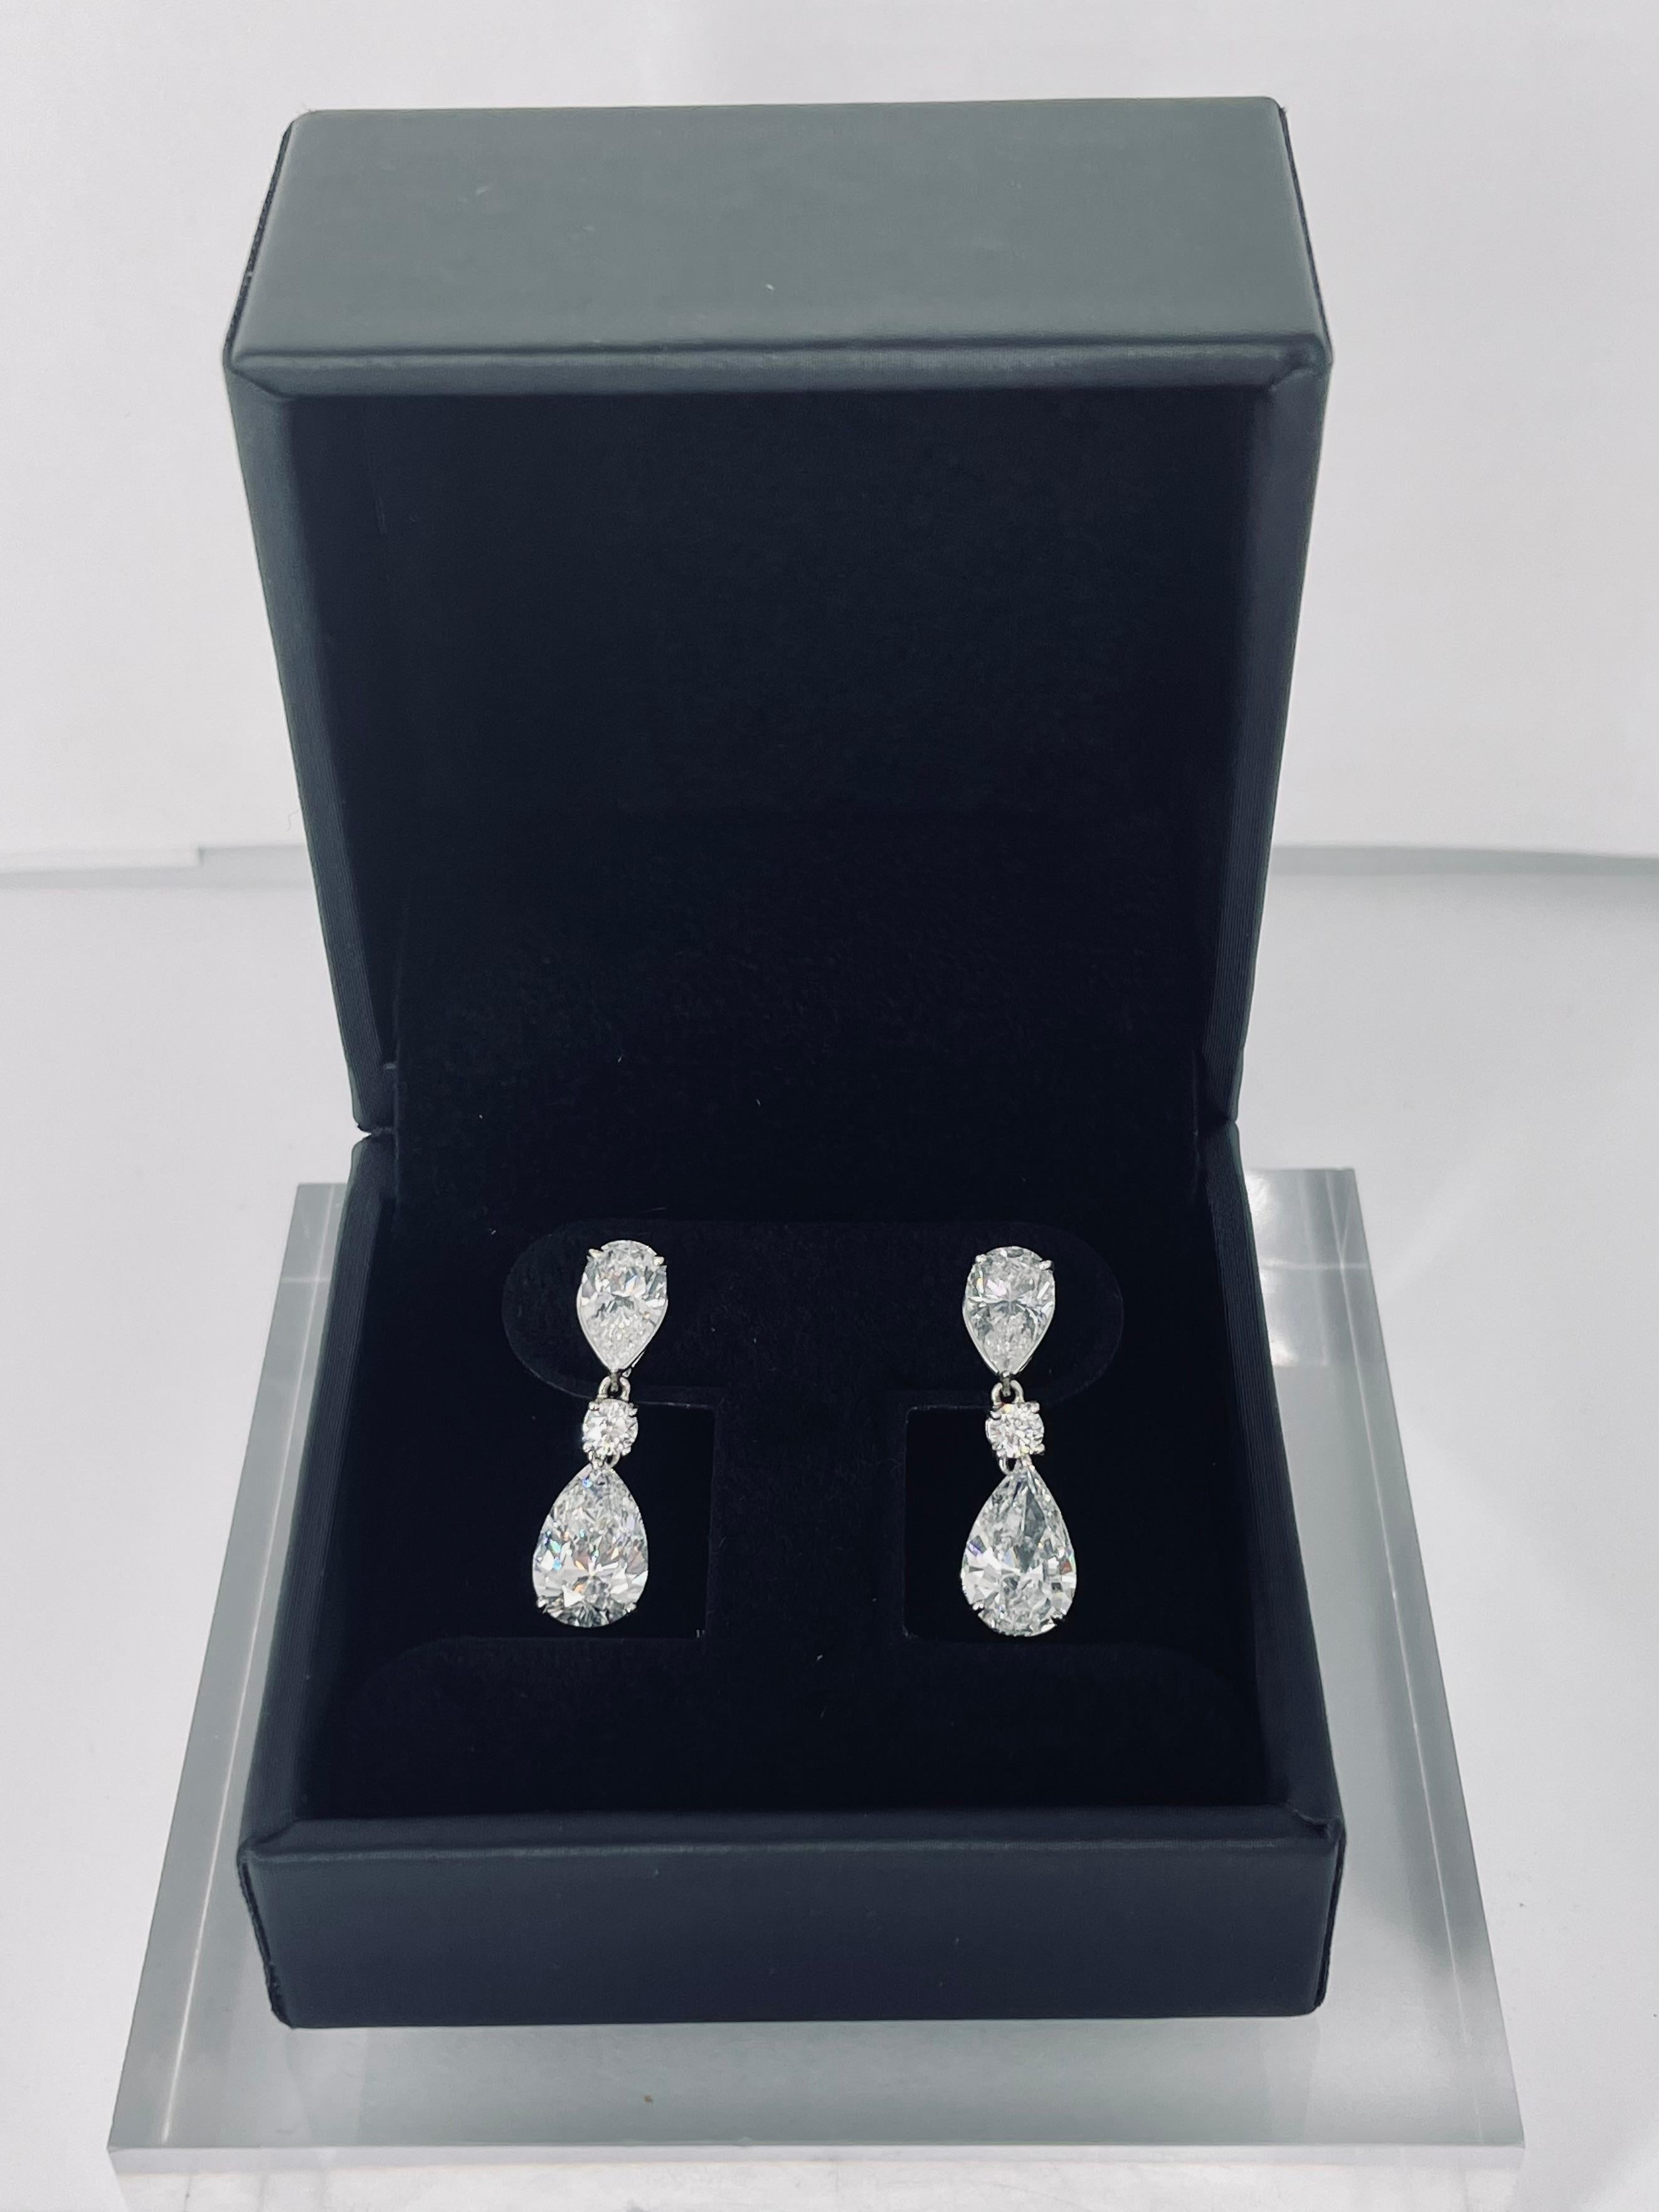 Elegant and timeless, these stunning earrings by J. Birnbach are the perfect piece for a bride or for a black tie event. The earrings are composed of a pear shape diamond on the ear, a small round diamond, then a larger pear diamond drop. The